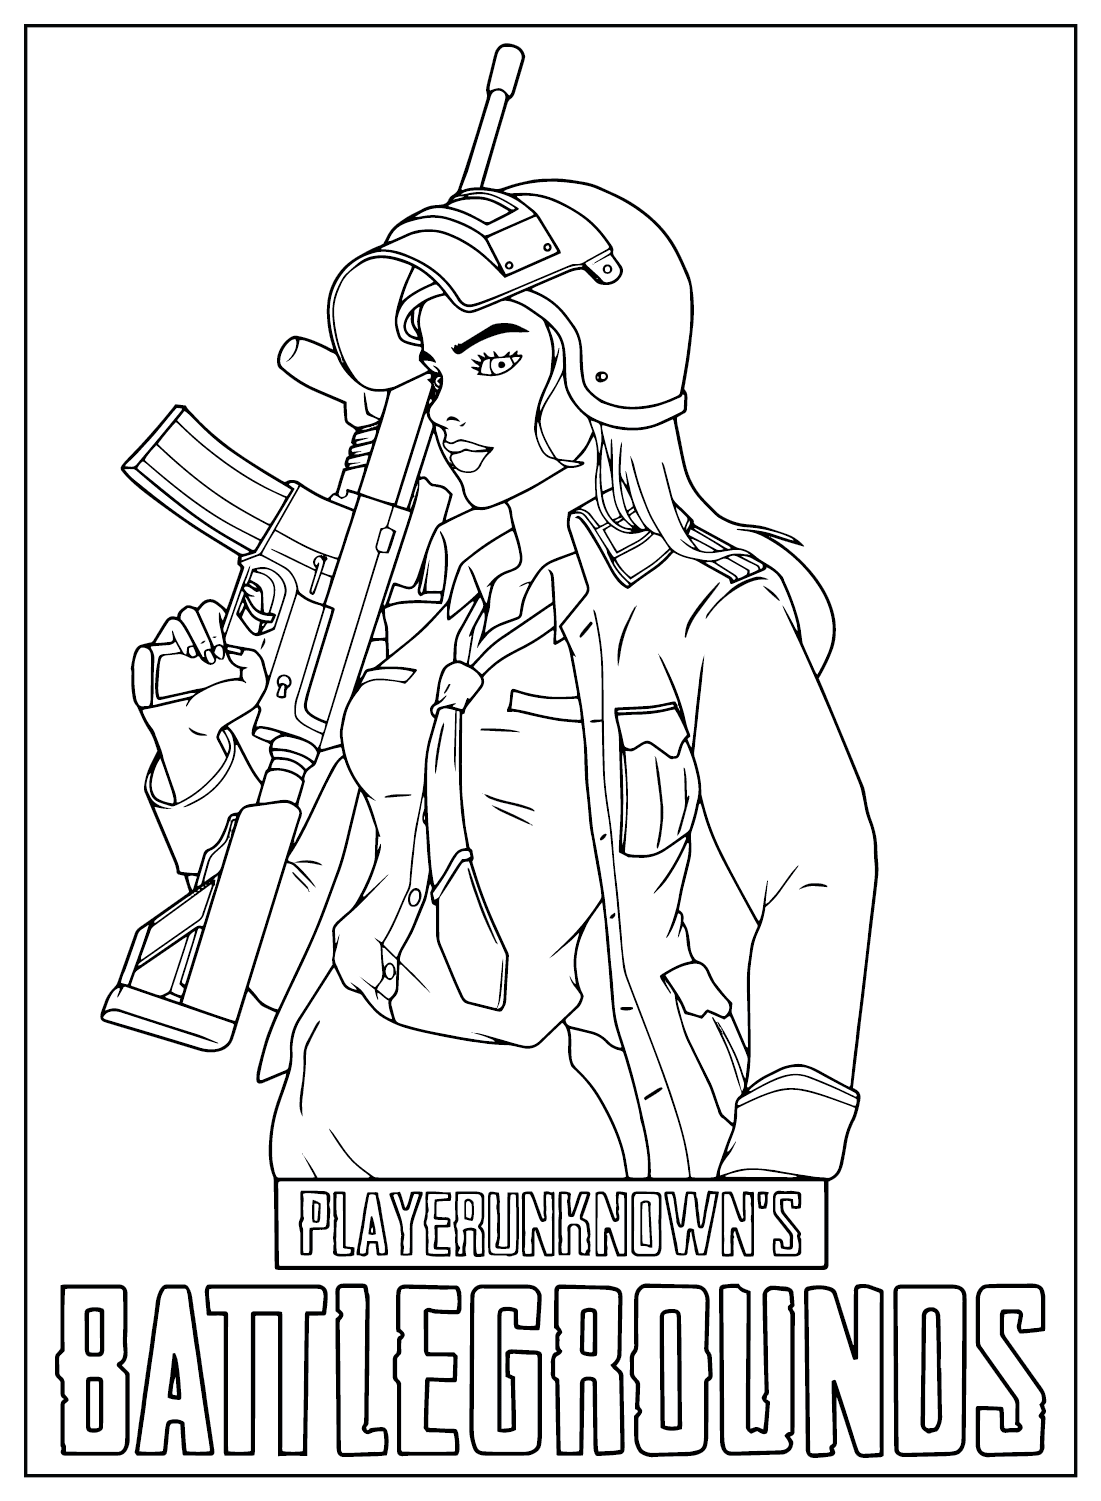 Pubg Battle Royale Coloring Page Free - Free Printable Coloring Pages